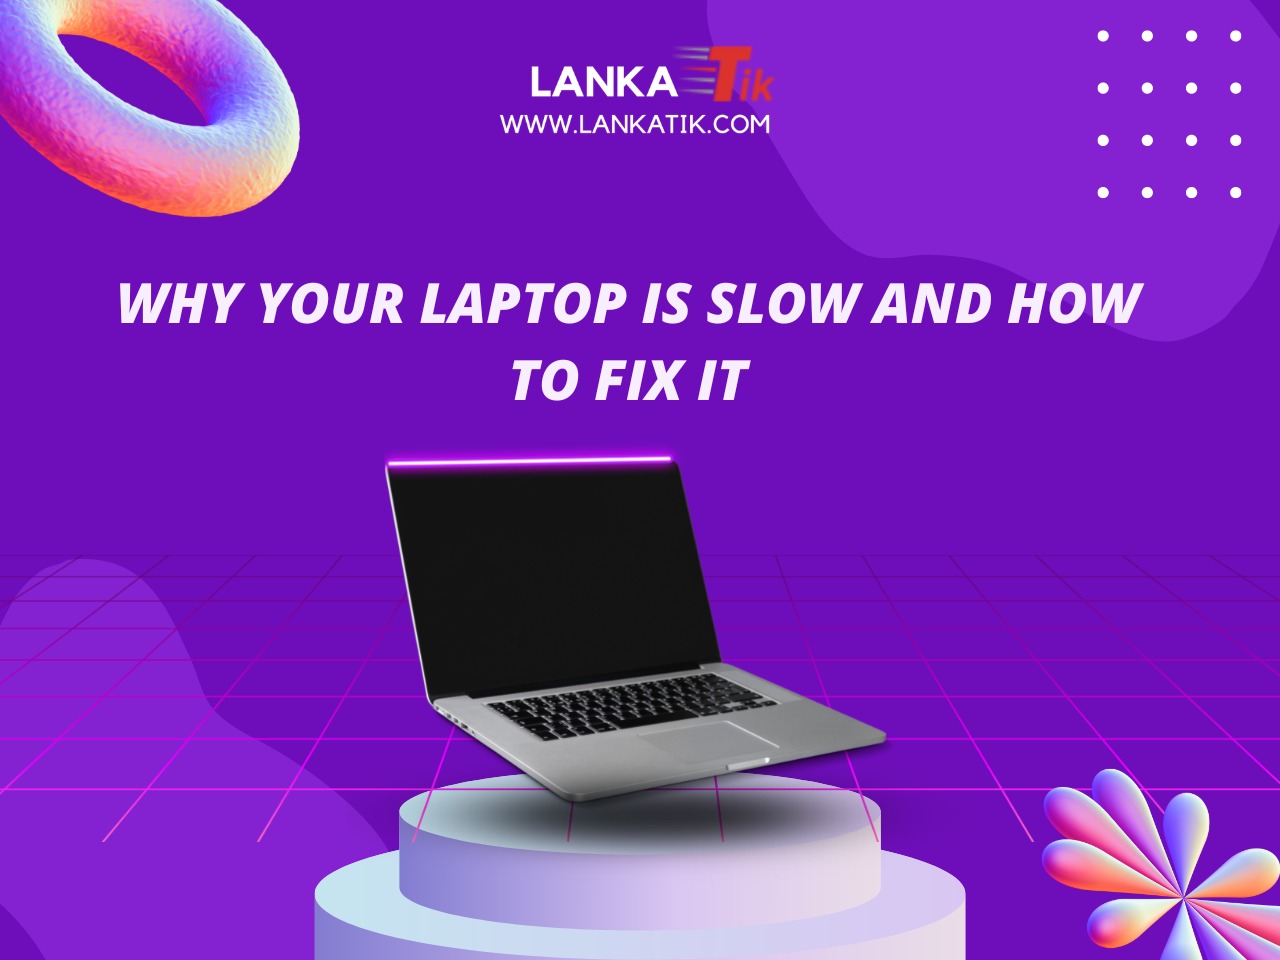 Why Your Laptop Is Slow and How to Fix It